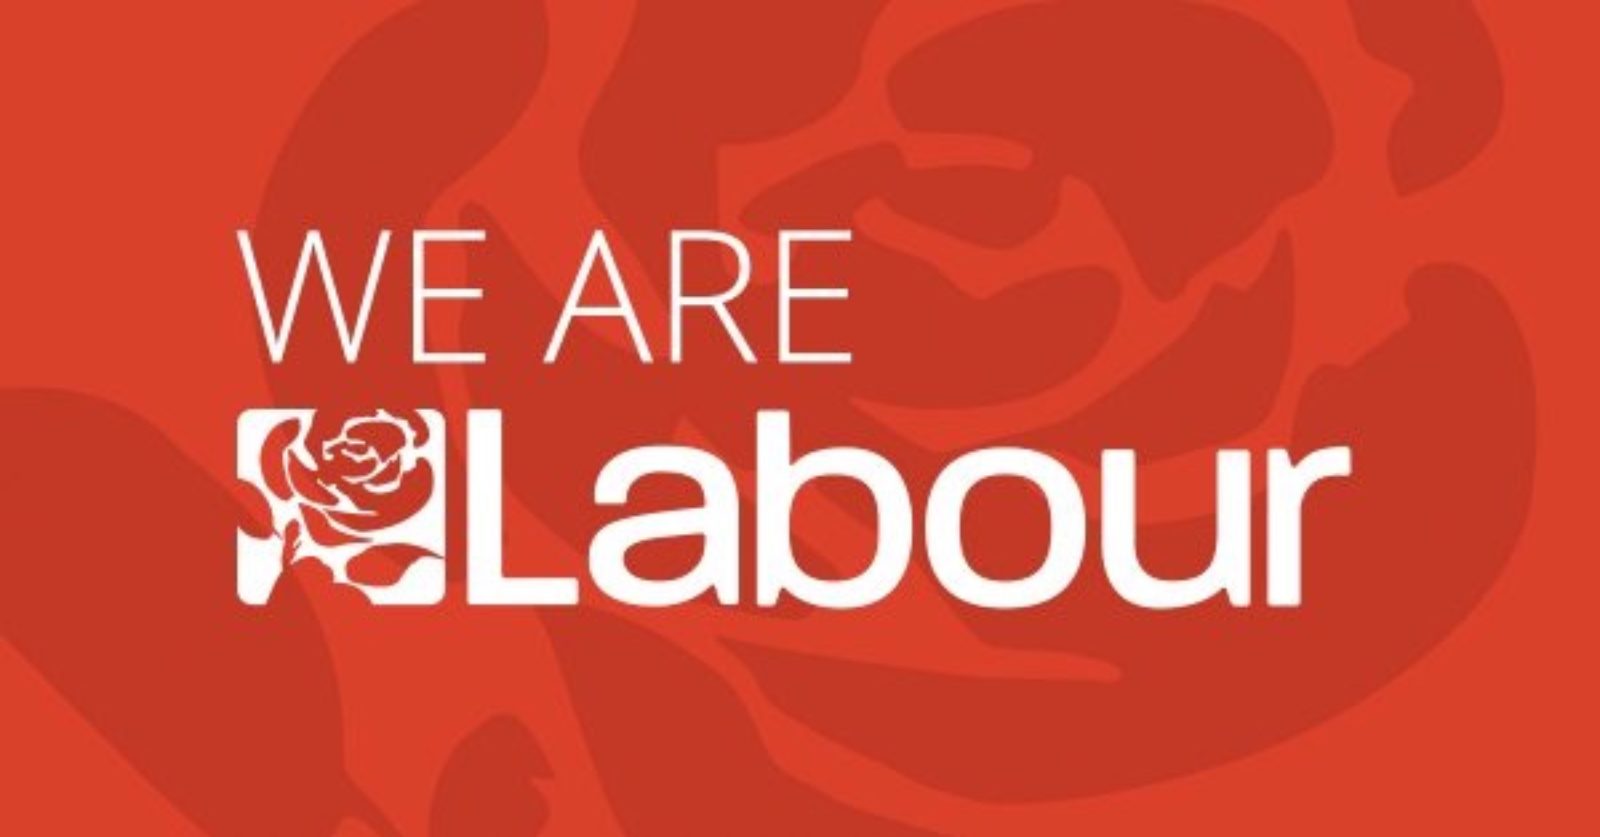 We are Labour image